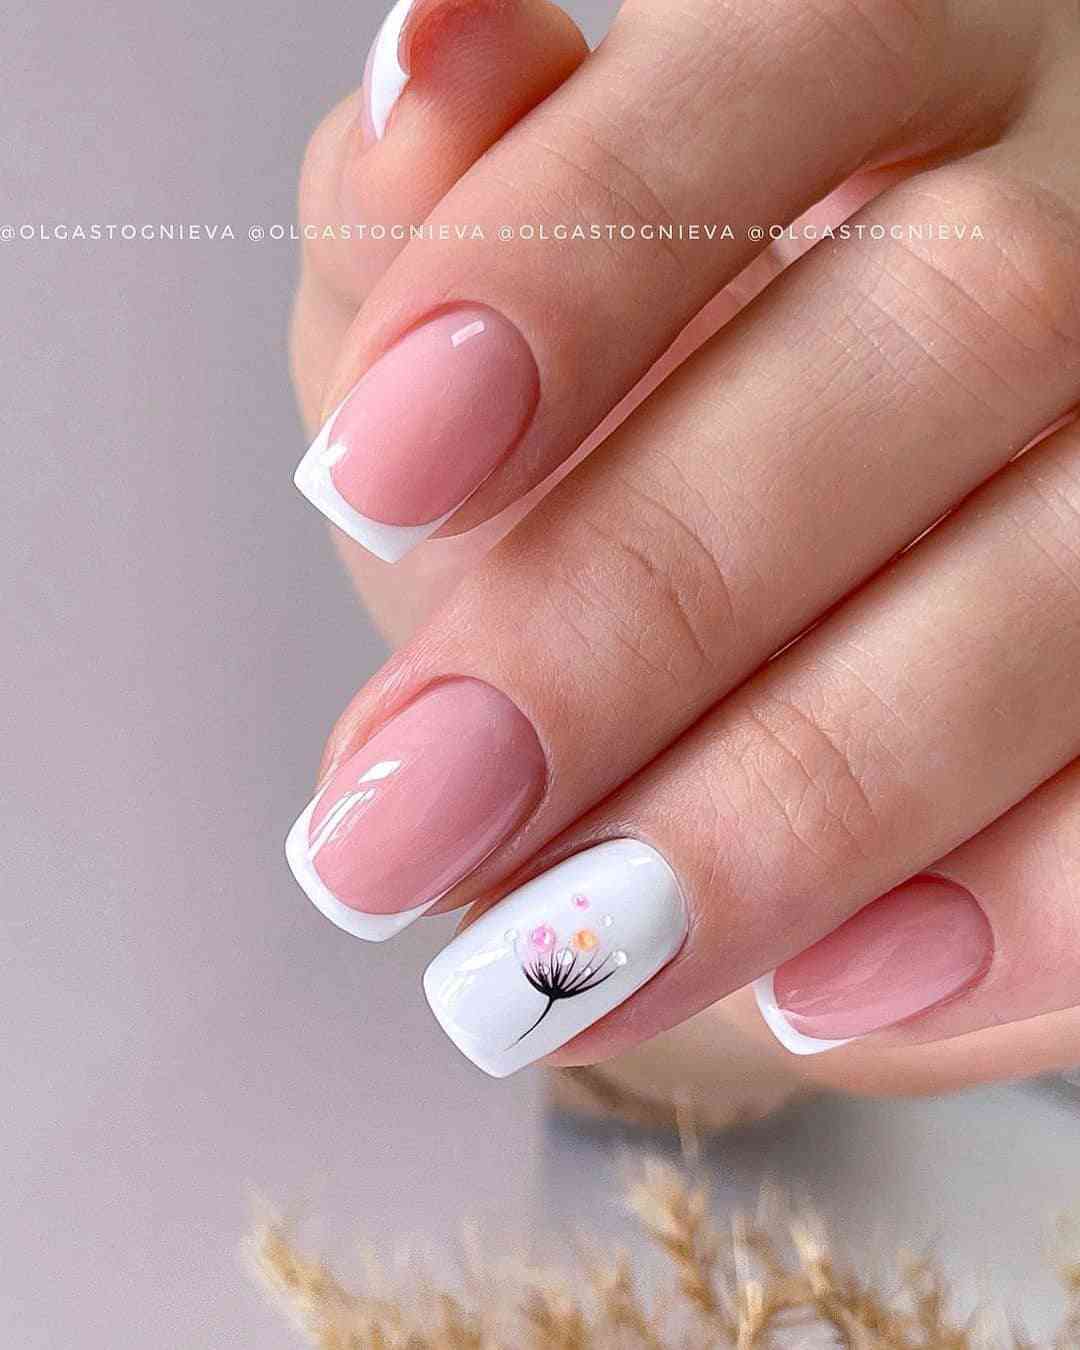 50+ Beautiful Summer Nail Designs For Women In 2021 images 28